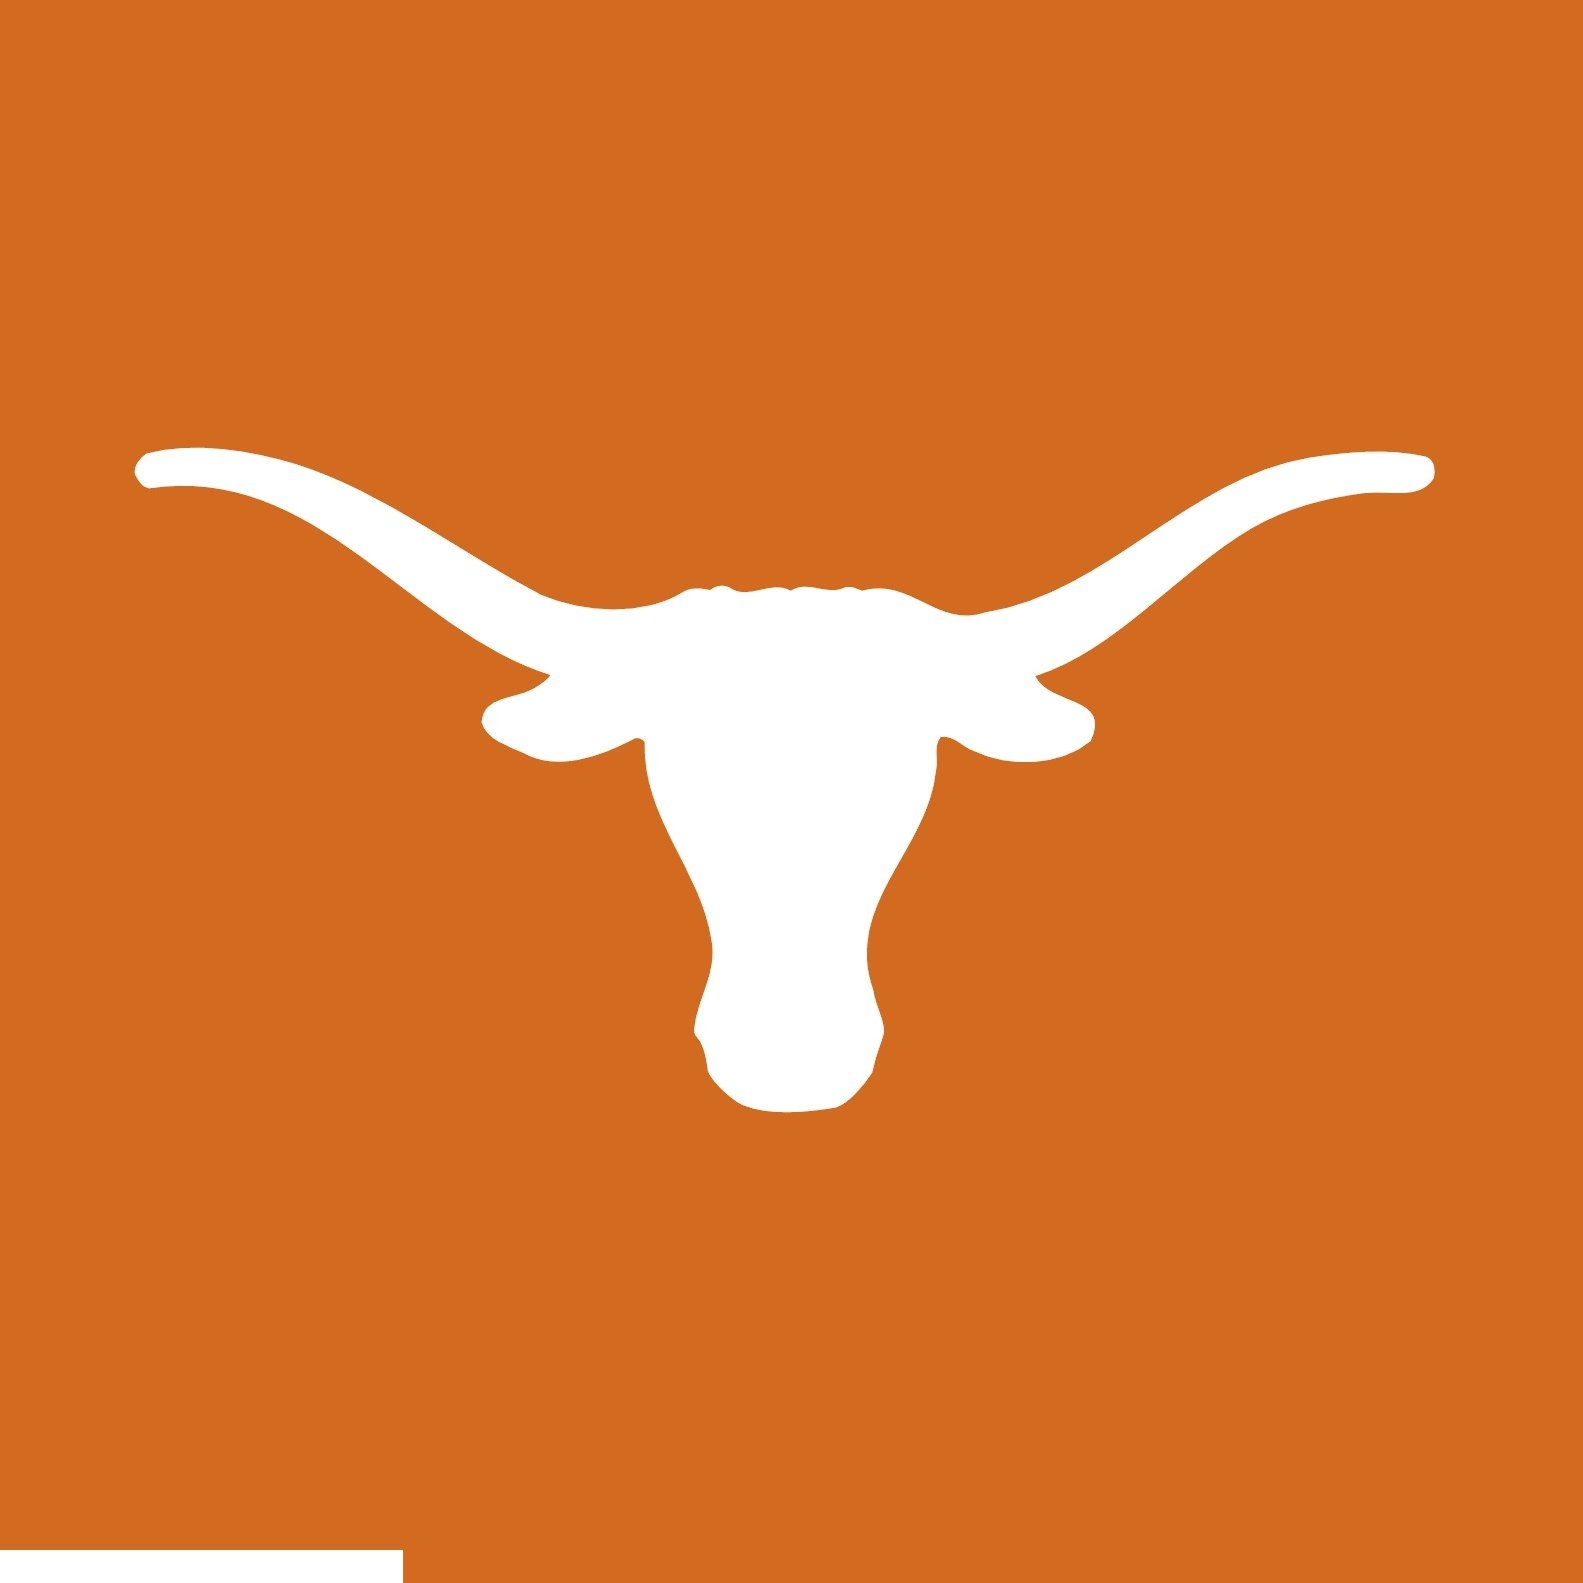 Butcher B. recommend best of Texas Longhorn Student Tape Sex with His Brothers Girlfriend.